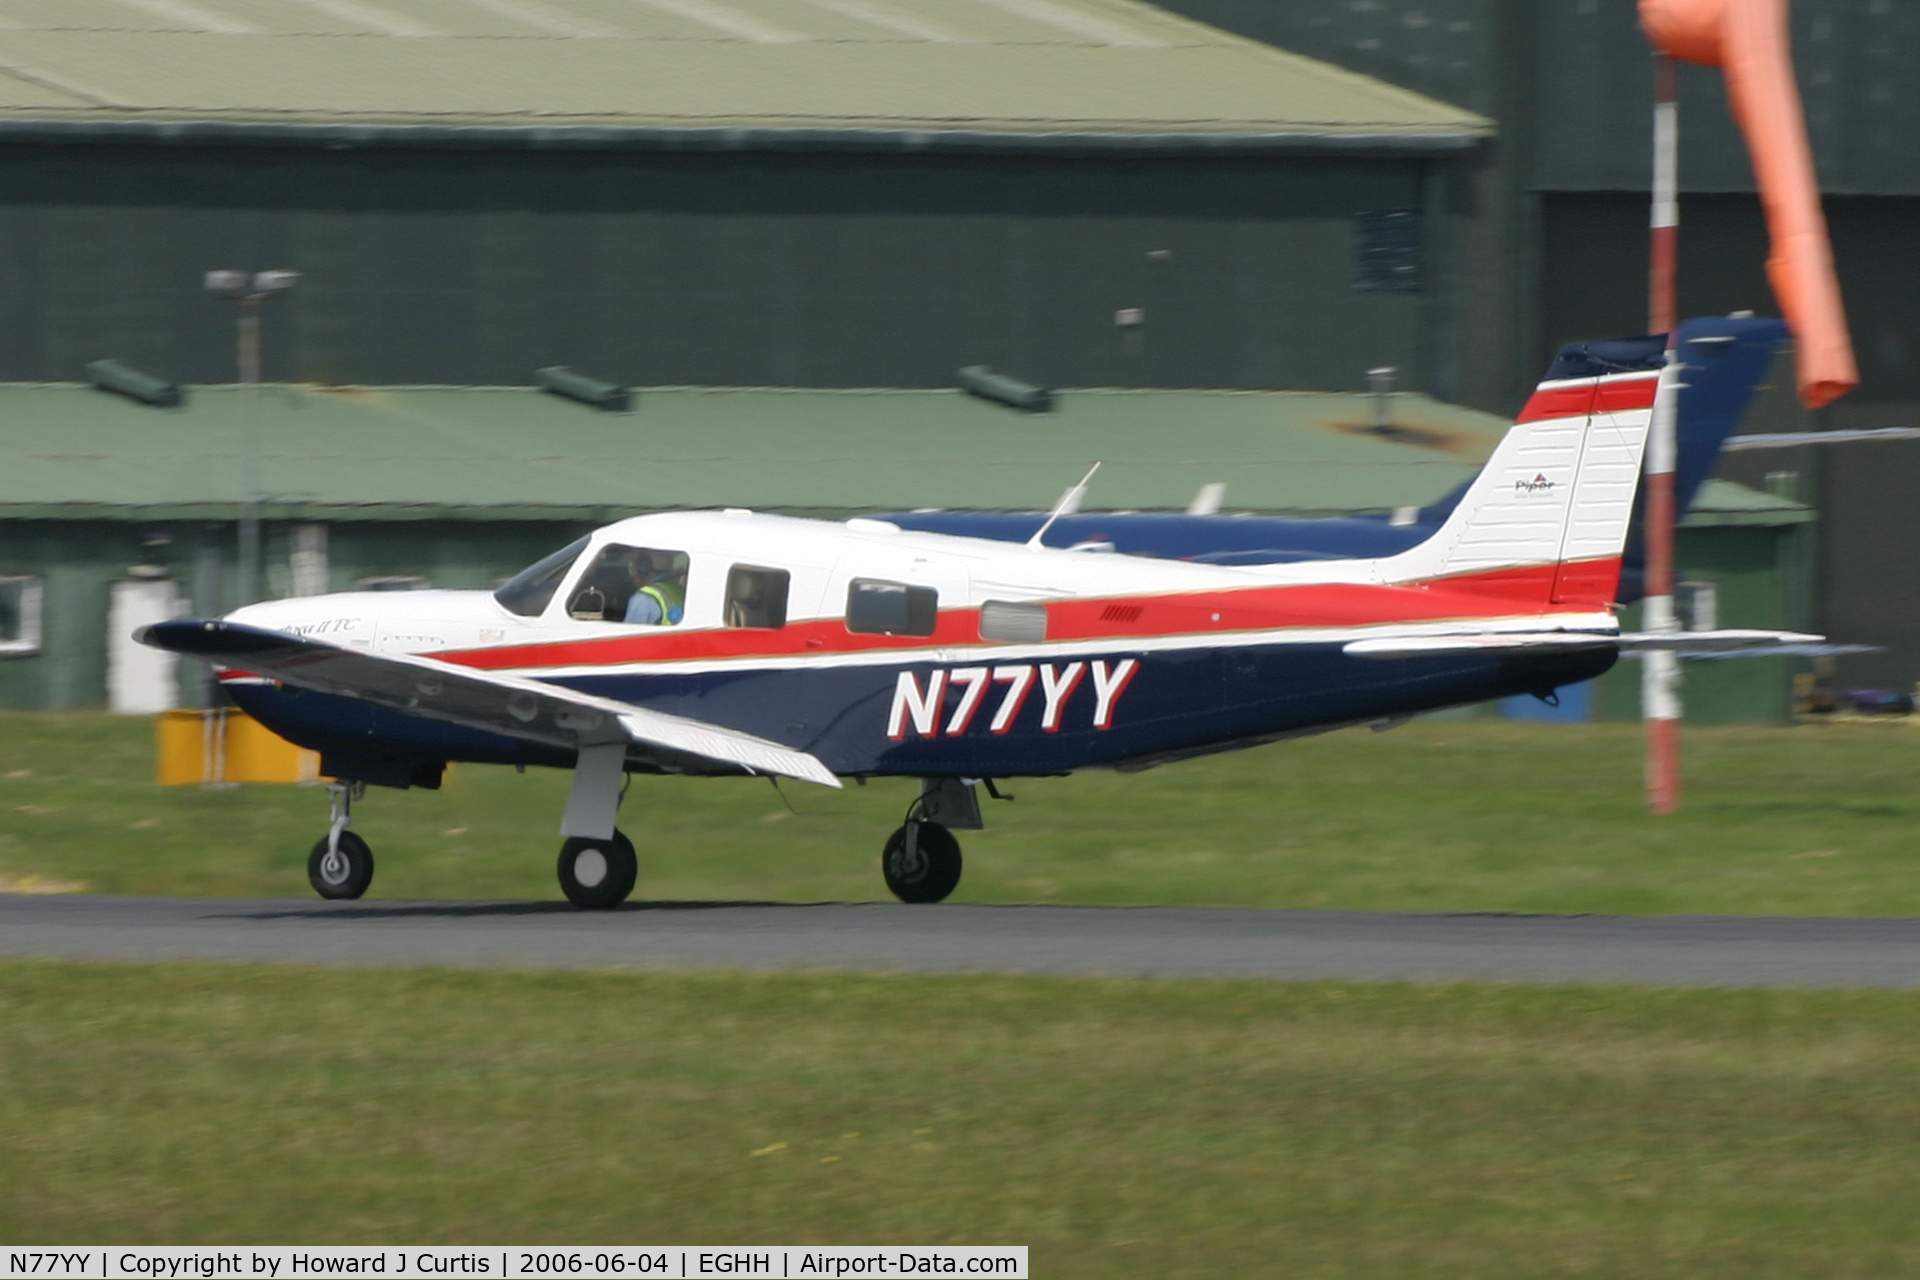 N77YY, 1999 Piper PA-32R-301T Turbo Saratoga C/N 3257120, Privately owned.